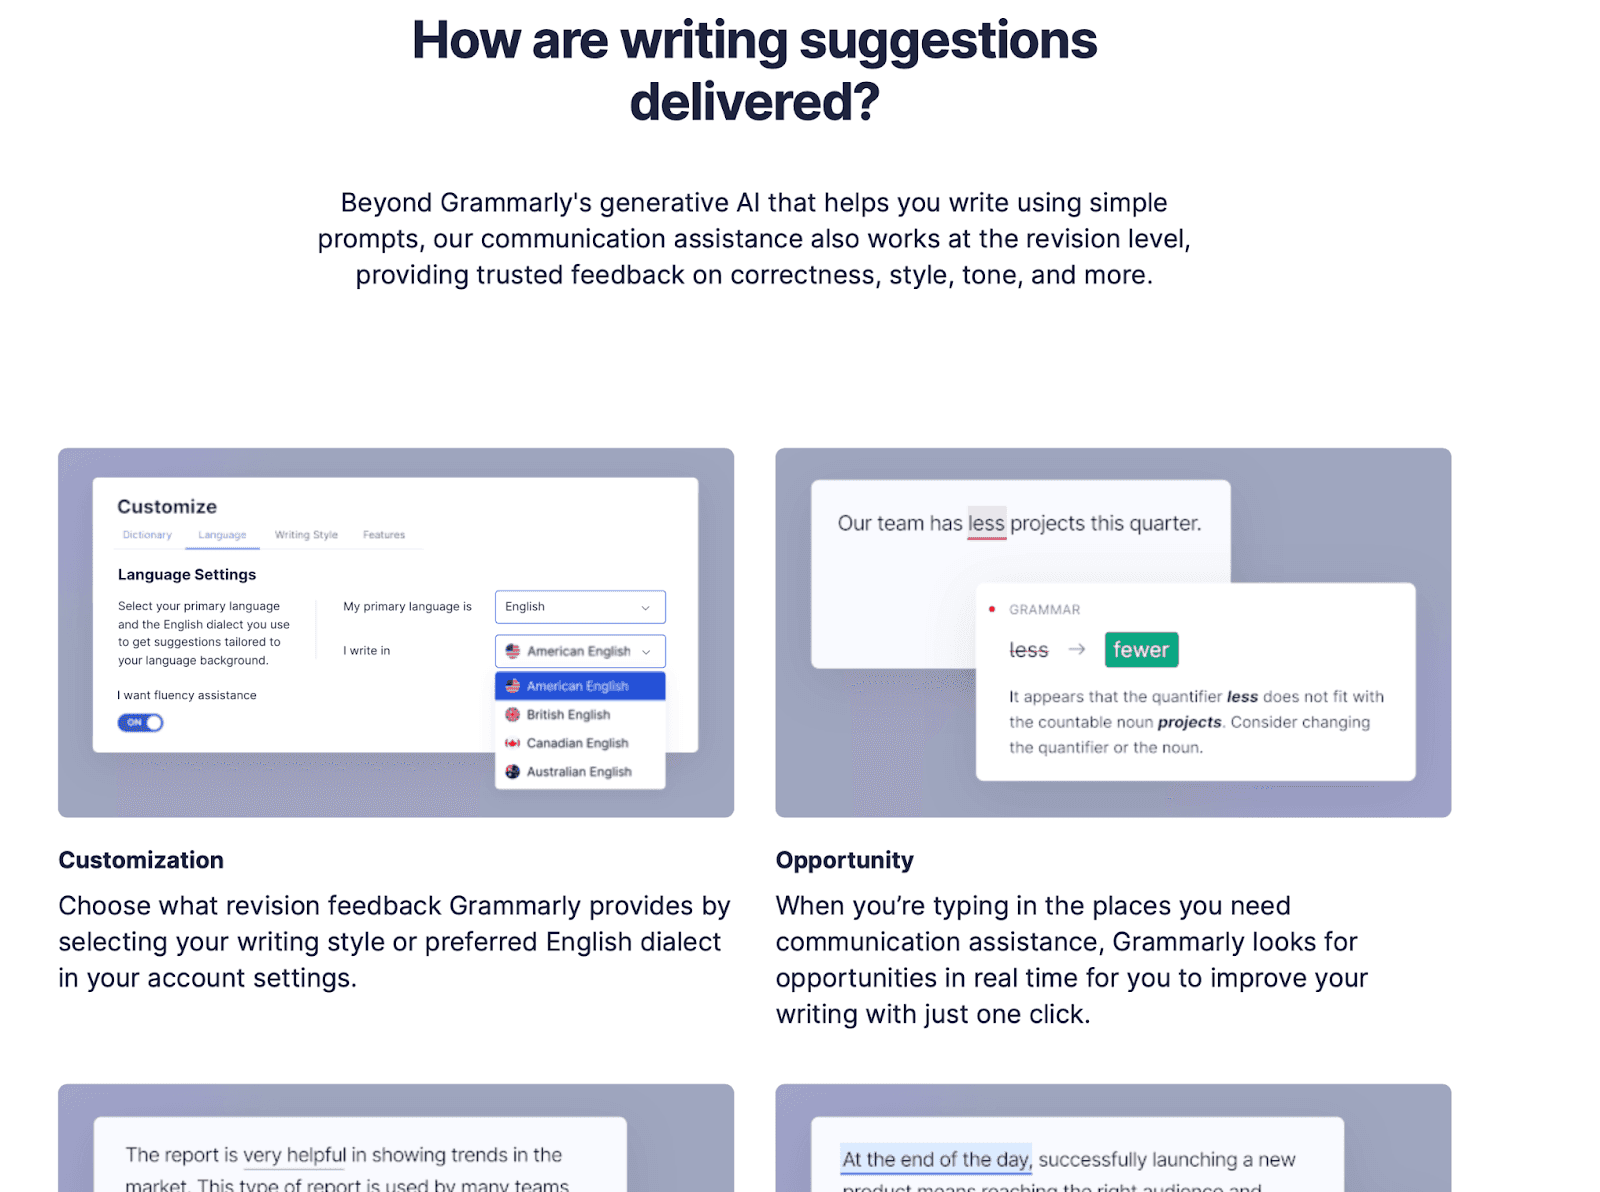 Grammarly website - How are writing suggestions delivered? Grammarly's generative AI helps writing using simple prompts